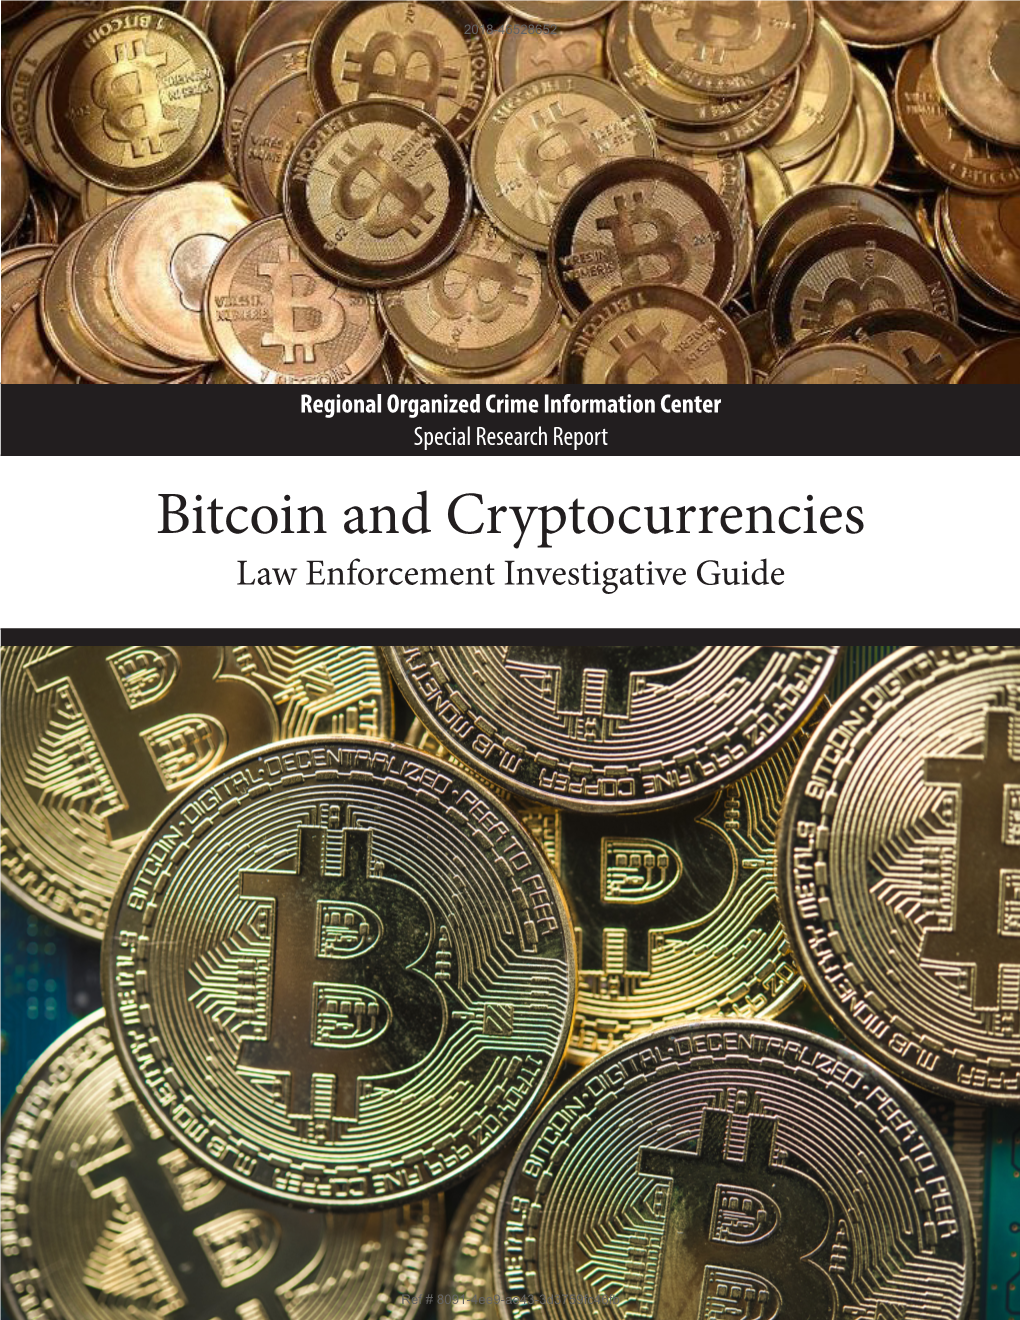 Bitcoin and Cryptocurrencies Law Enforcement Investigative Guide